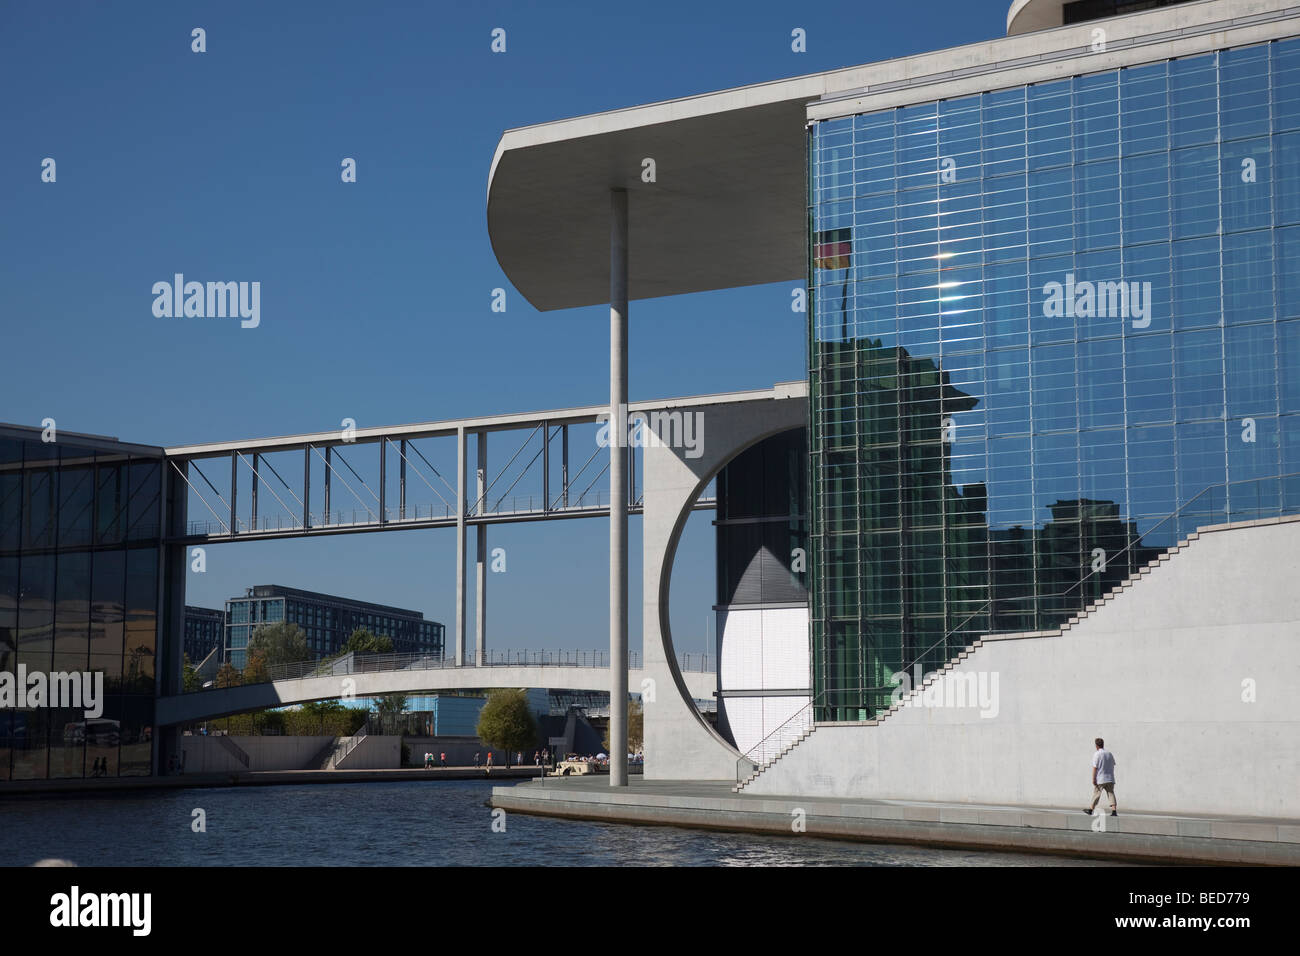 The Marie-Elisabeth-Lüders-Haus on the river Spree, Berlin, is one of a series of new government buildings Stock Photo